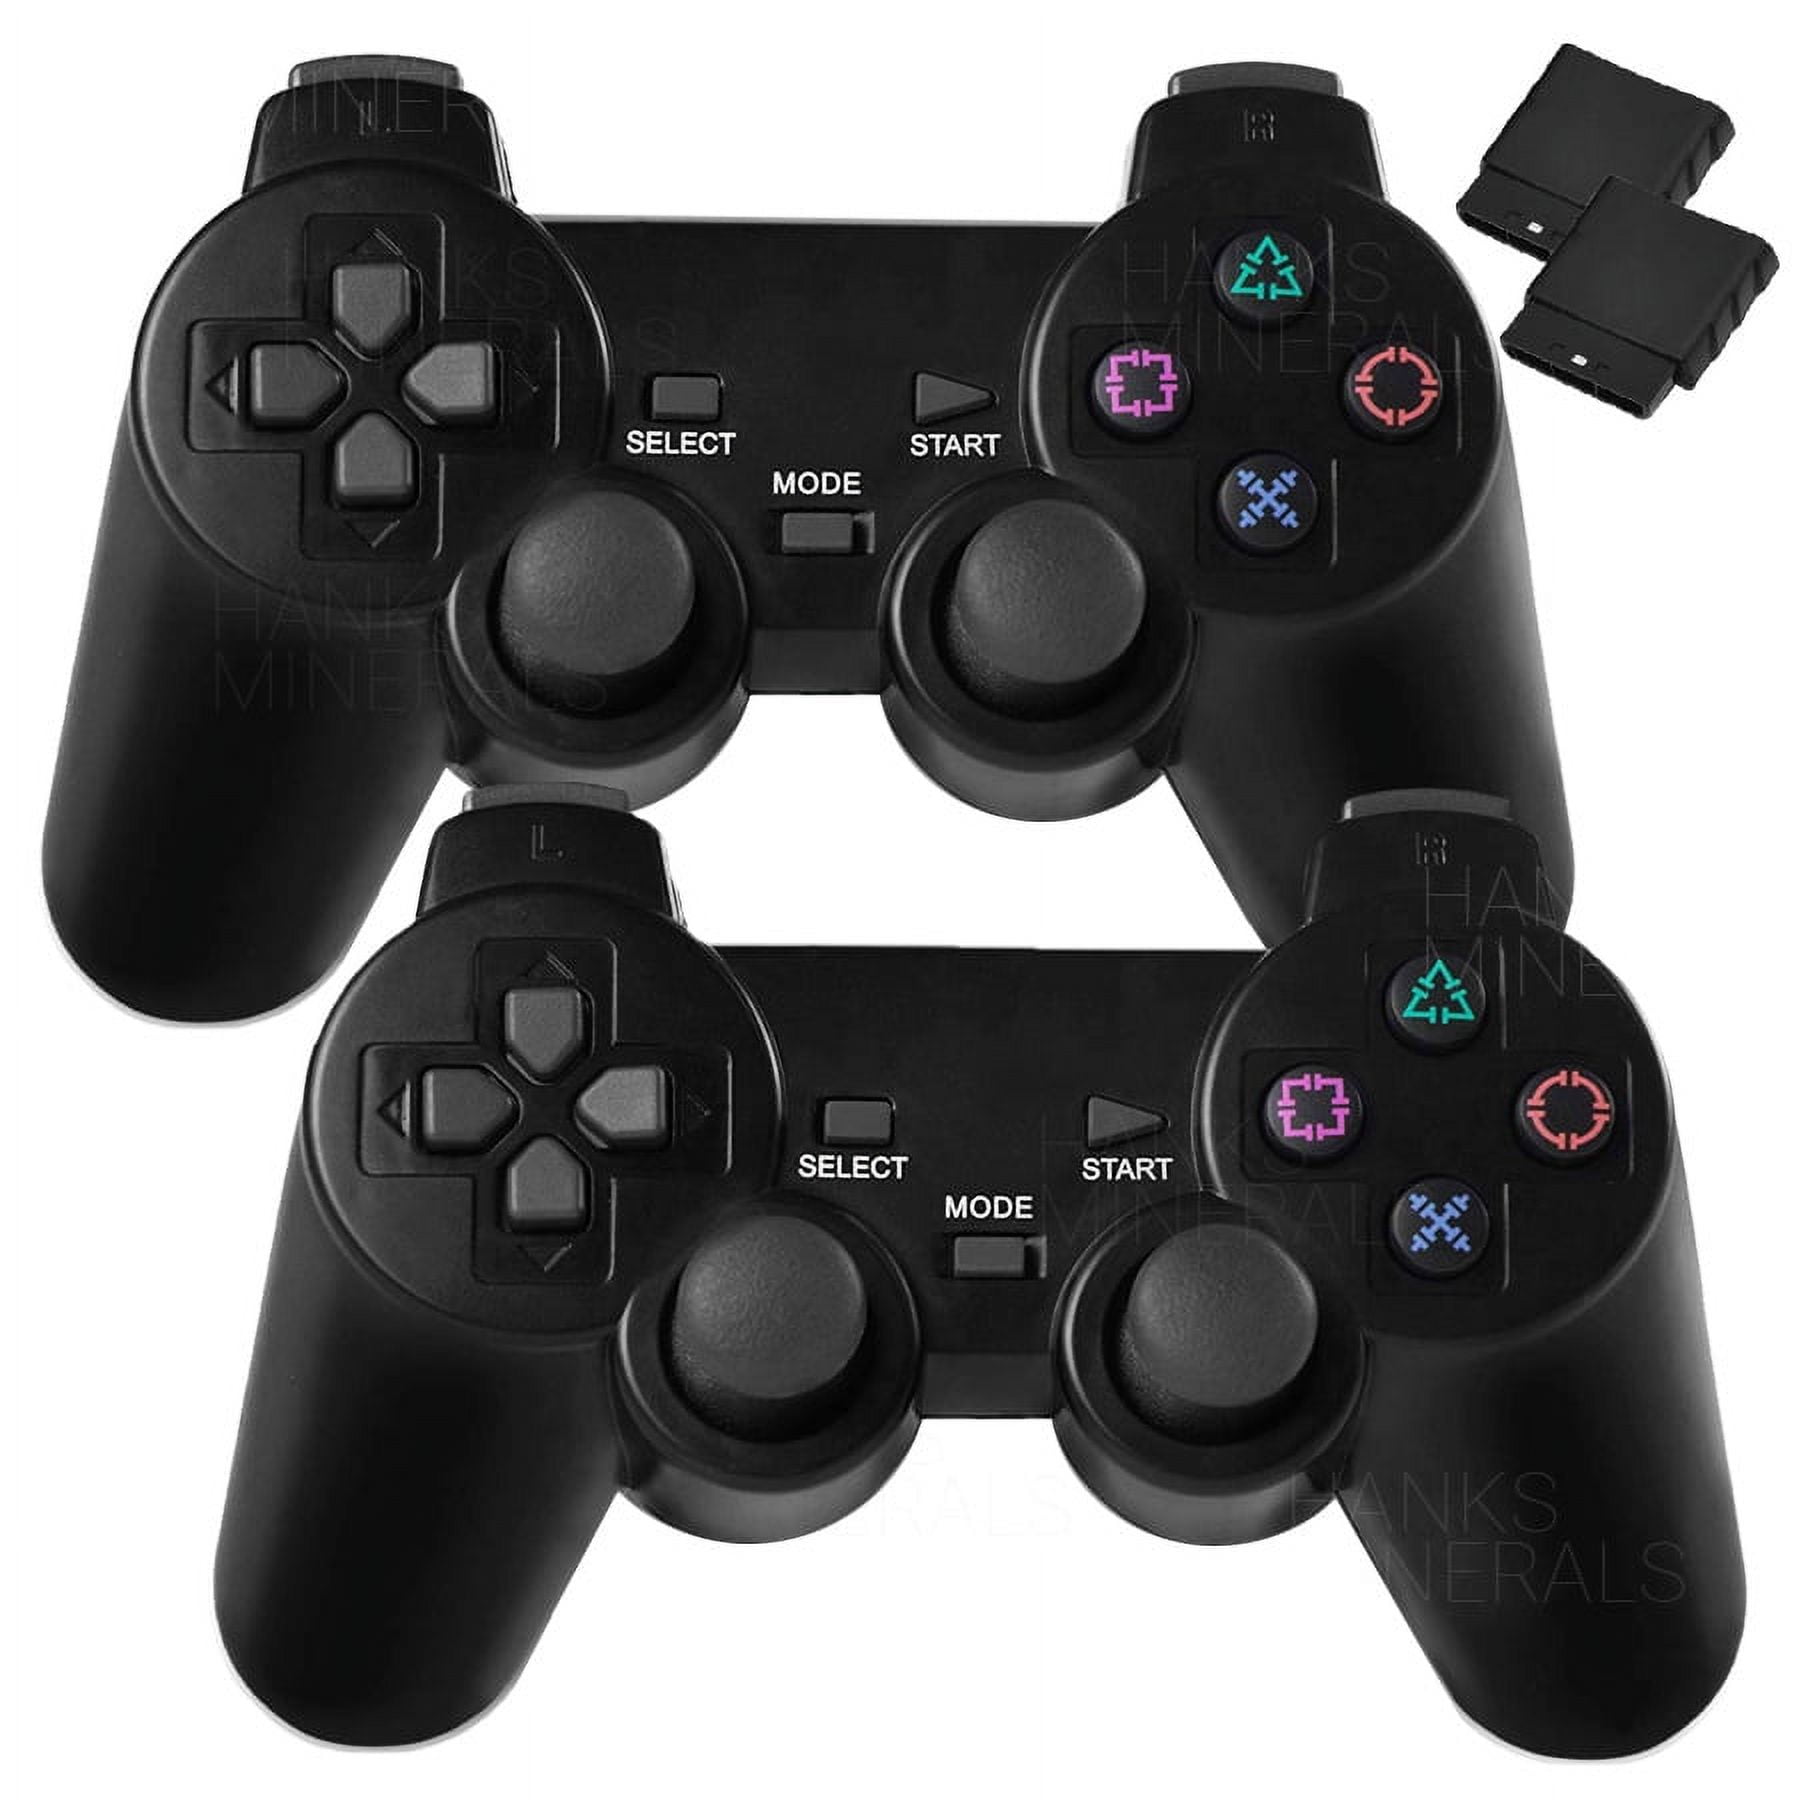 sony ps2 controller For Precision 